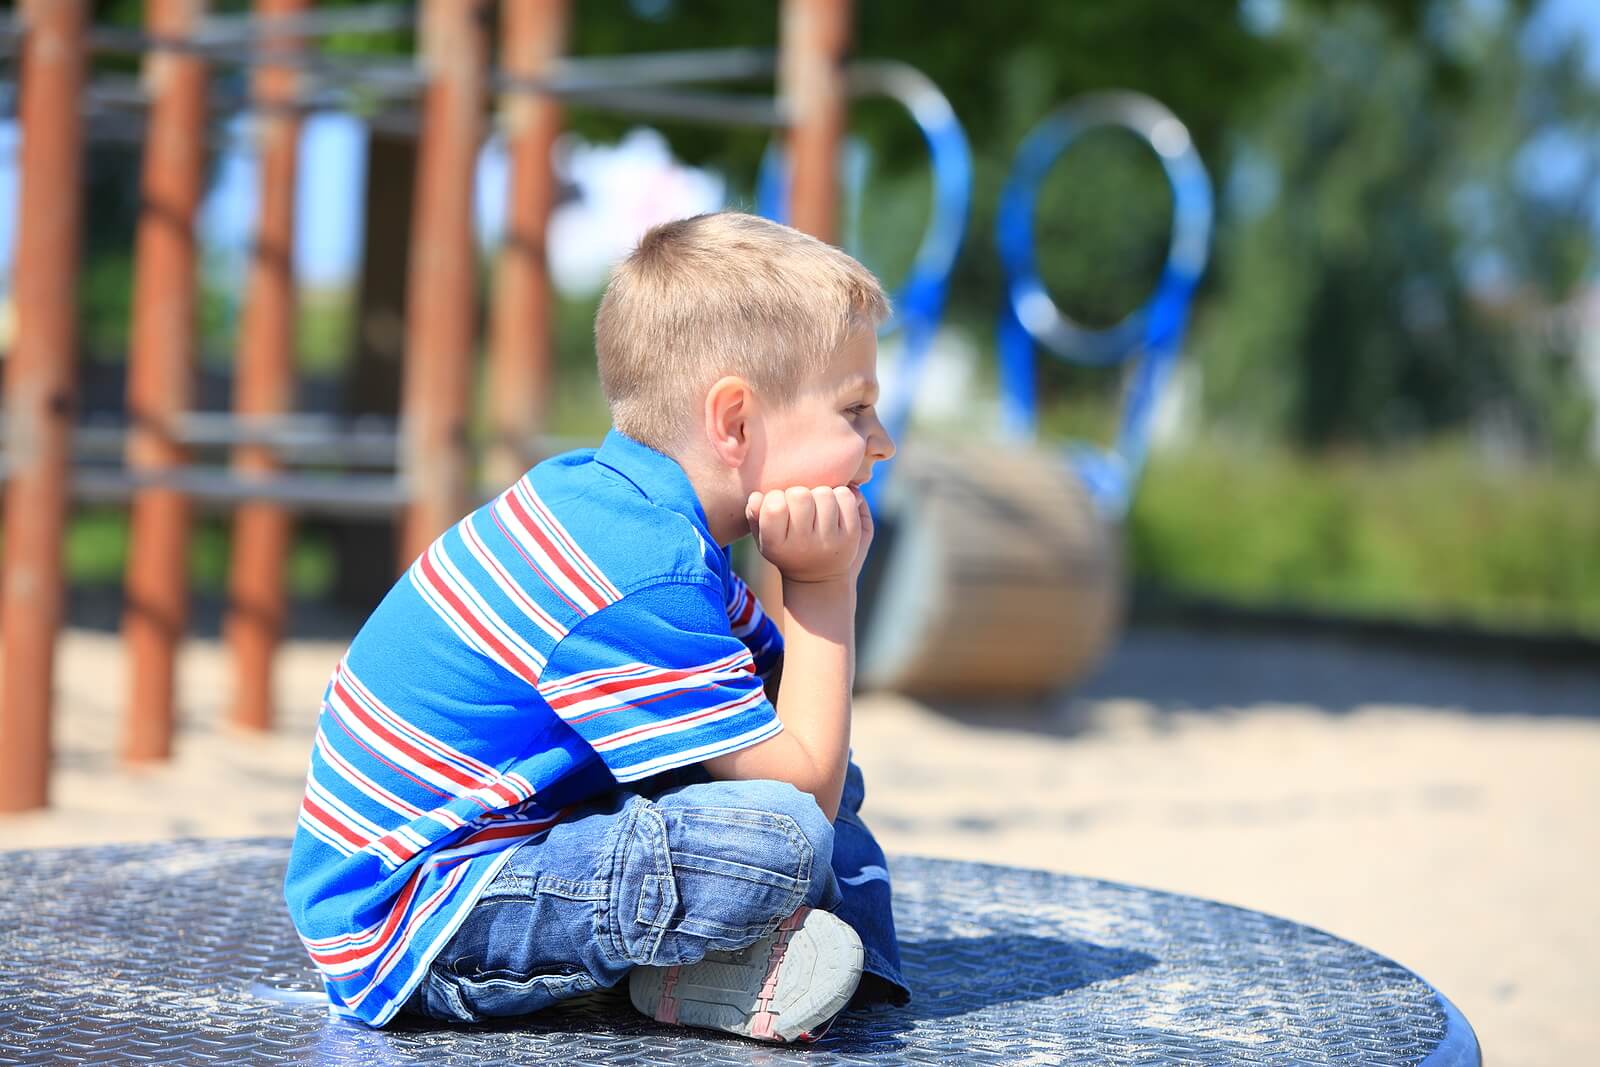 Image of a thoughtful boy sitting on a playground resting his head on his hands. Discover how grief counseling in Saint Petersburg, FL can help your child cope with their emotions.